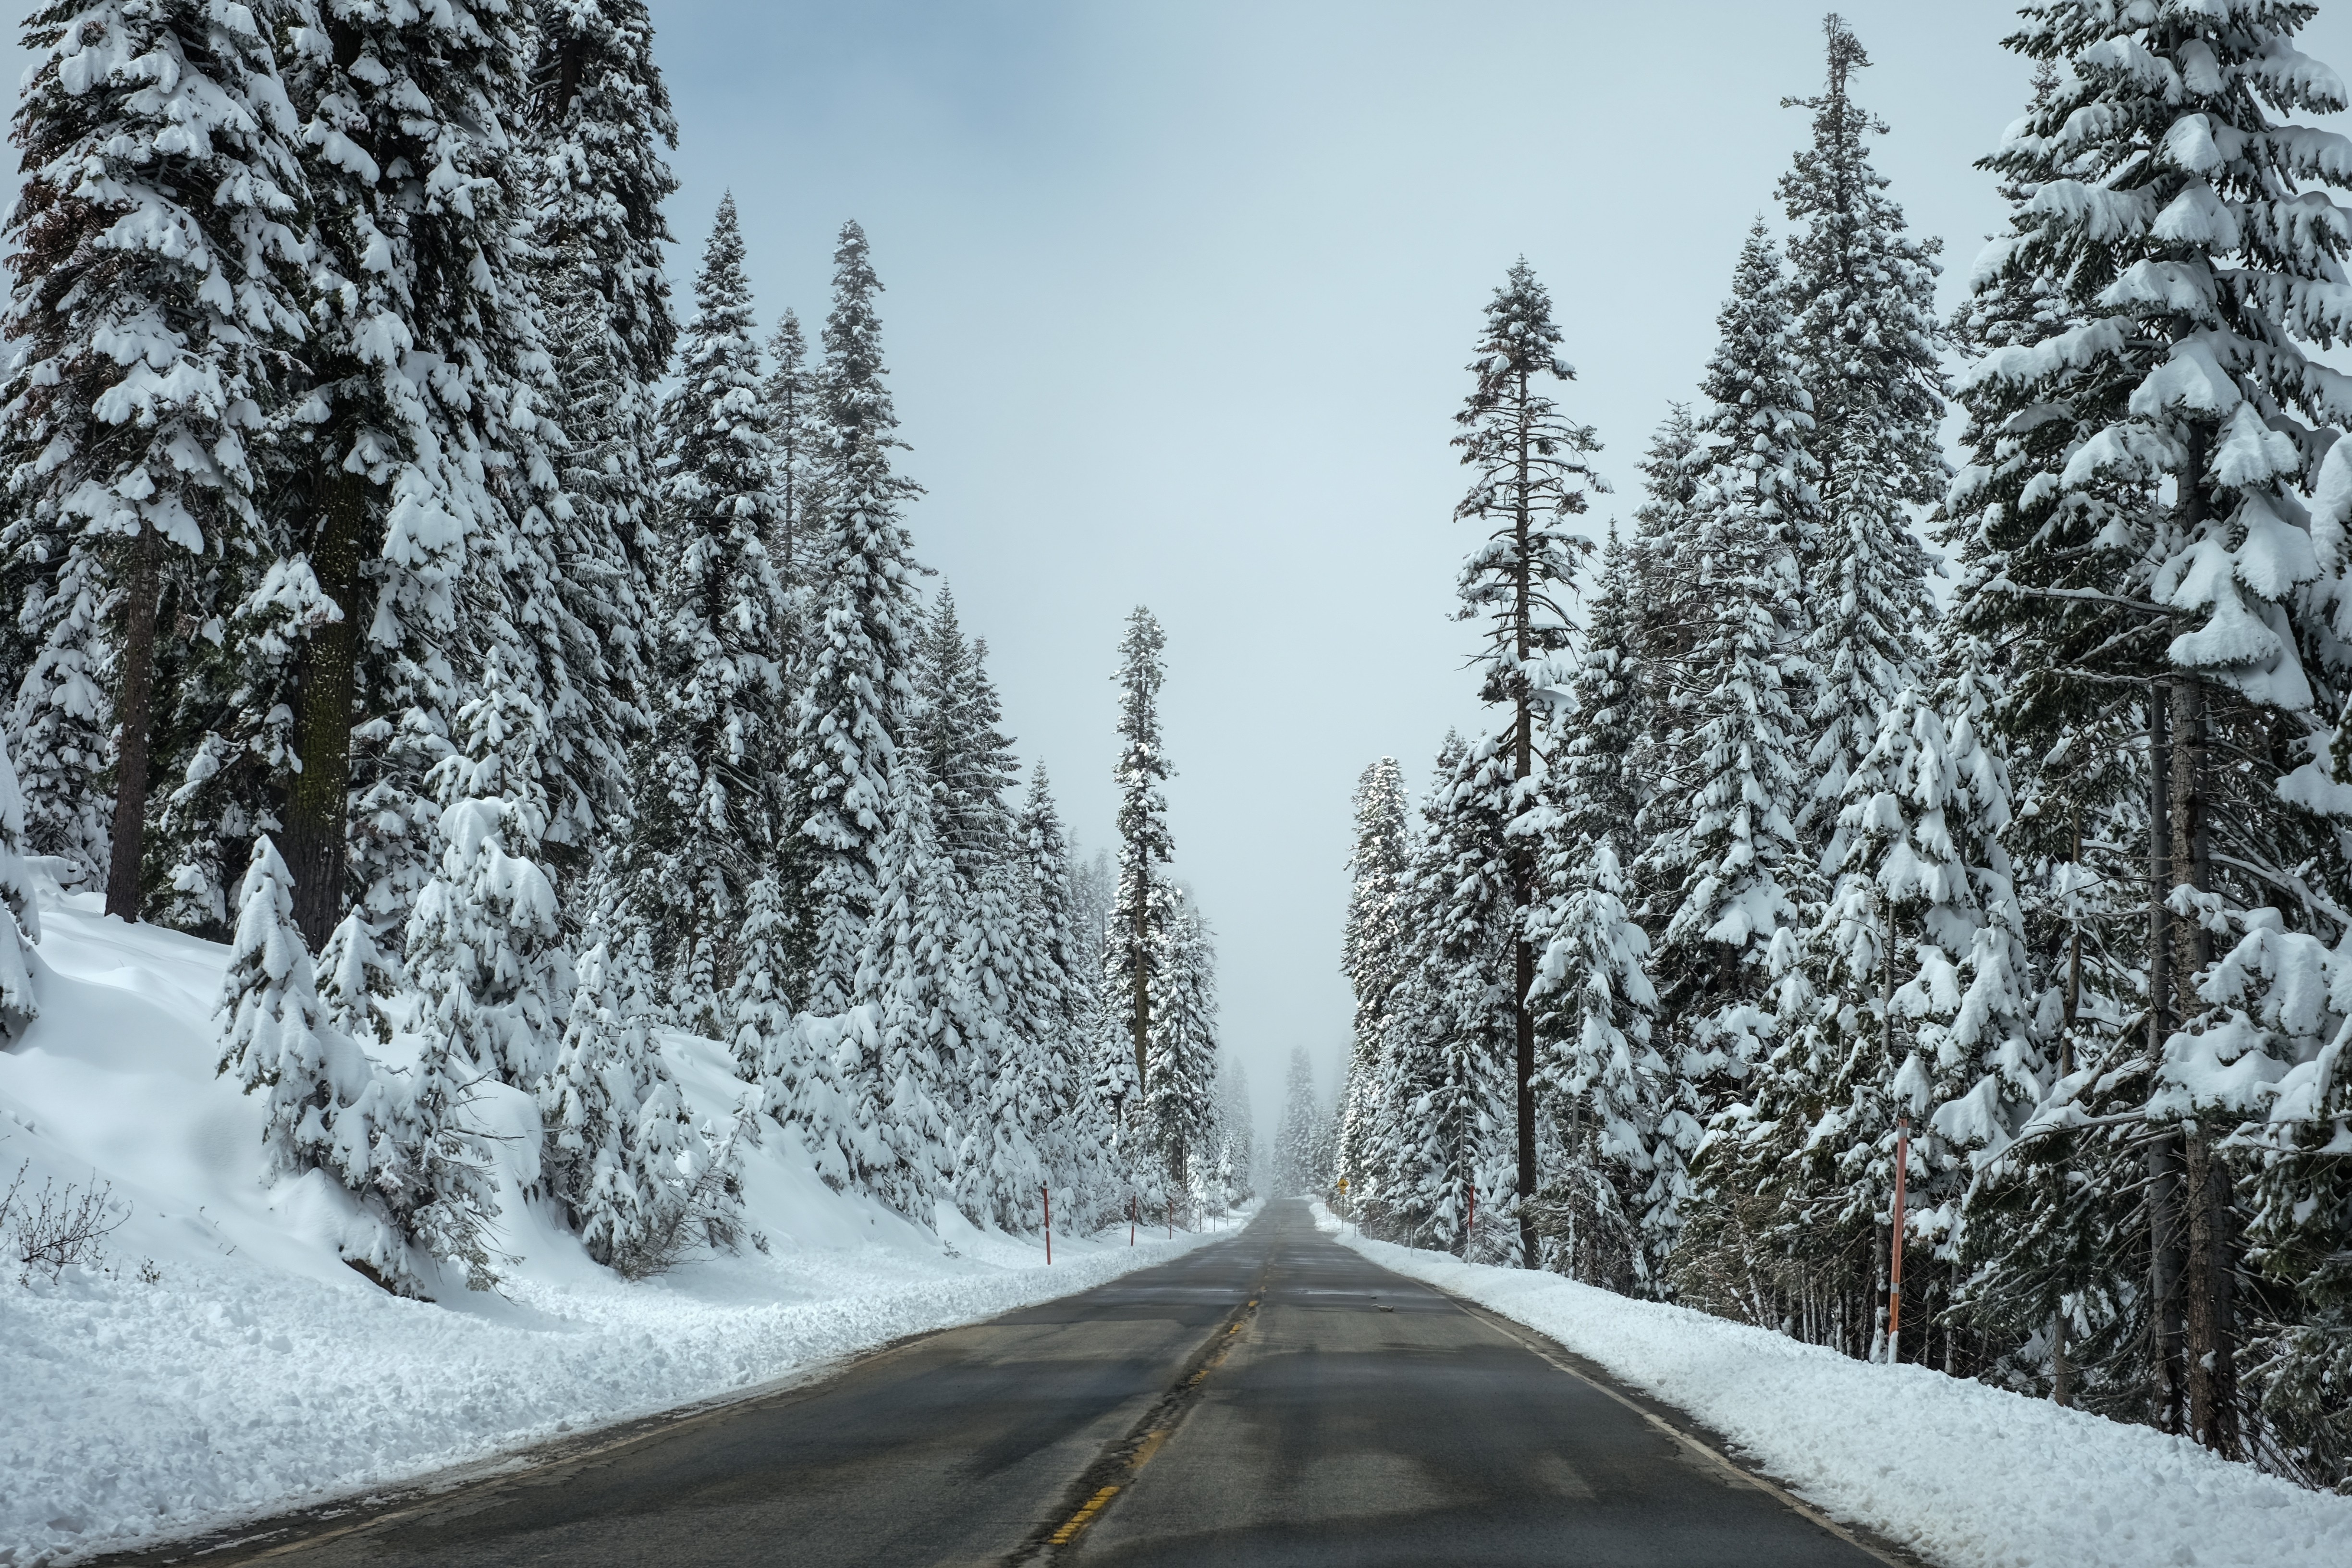 1920x1080 Wallpaper Grey Concrete Road Between Pine Trees With Snow